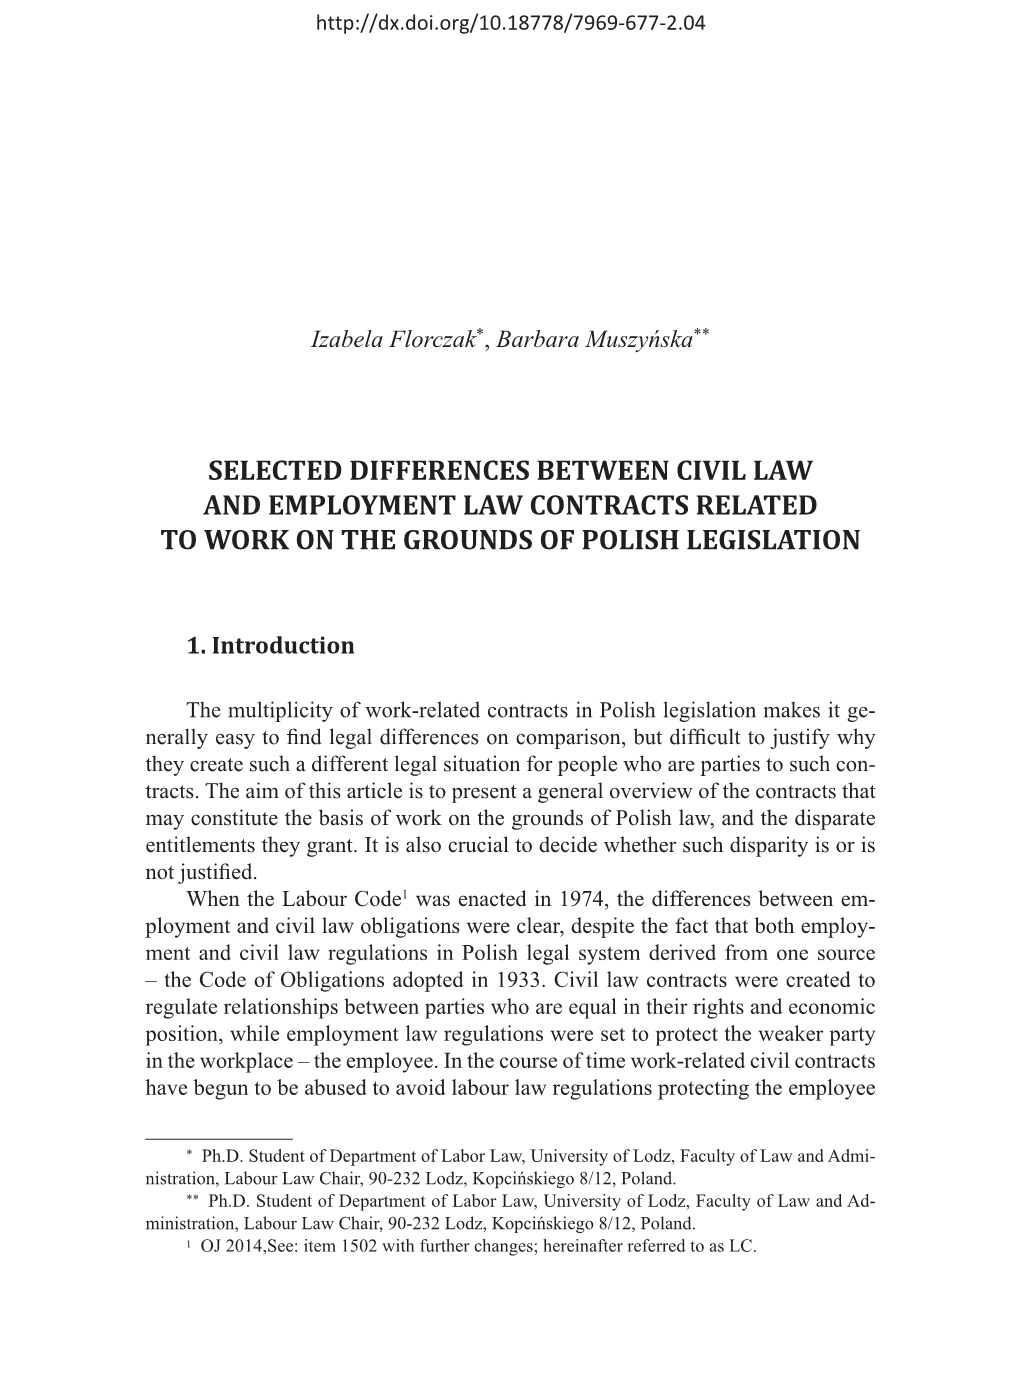 Selected Differences Between Civil Law and Employment Law Contracts Related to Work on the Grounds of Polish Legislation